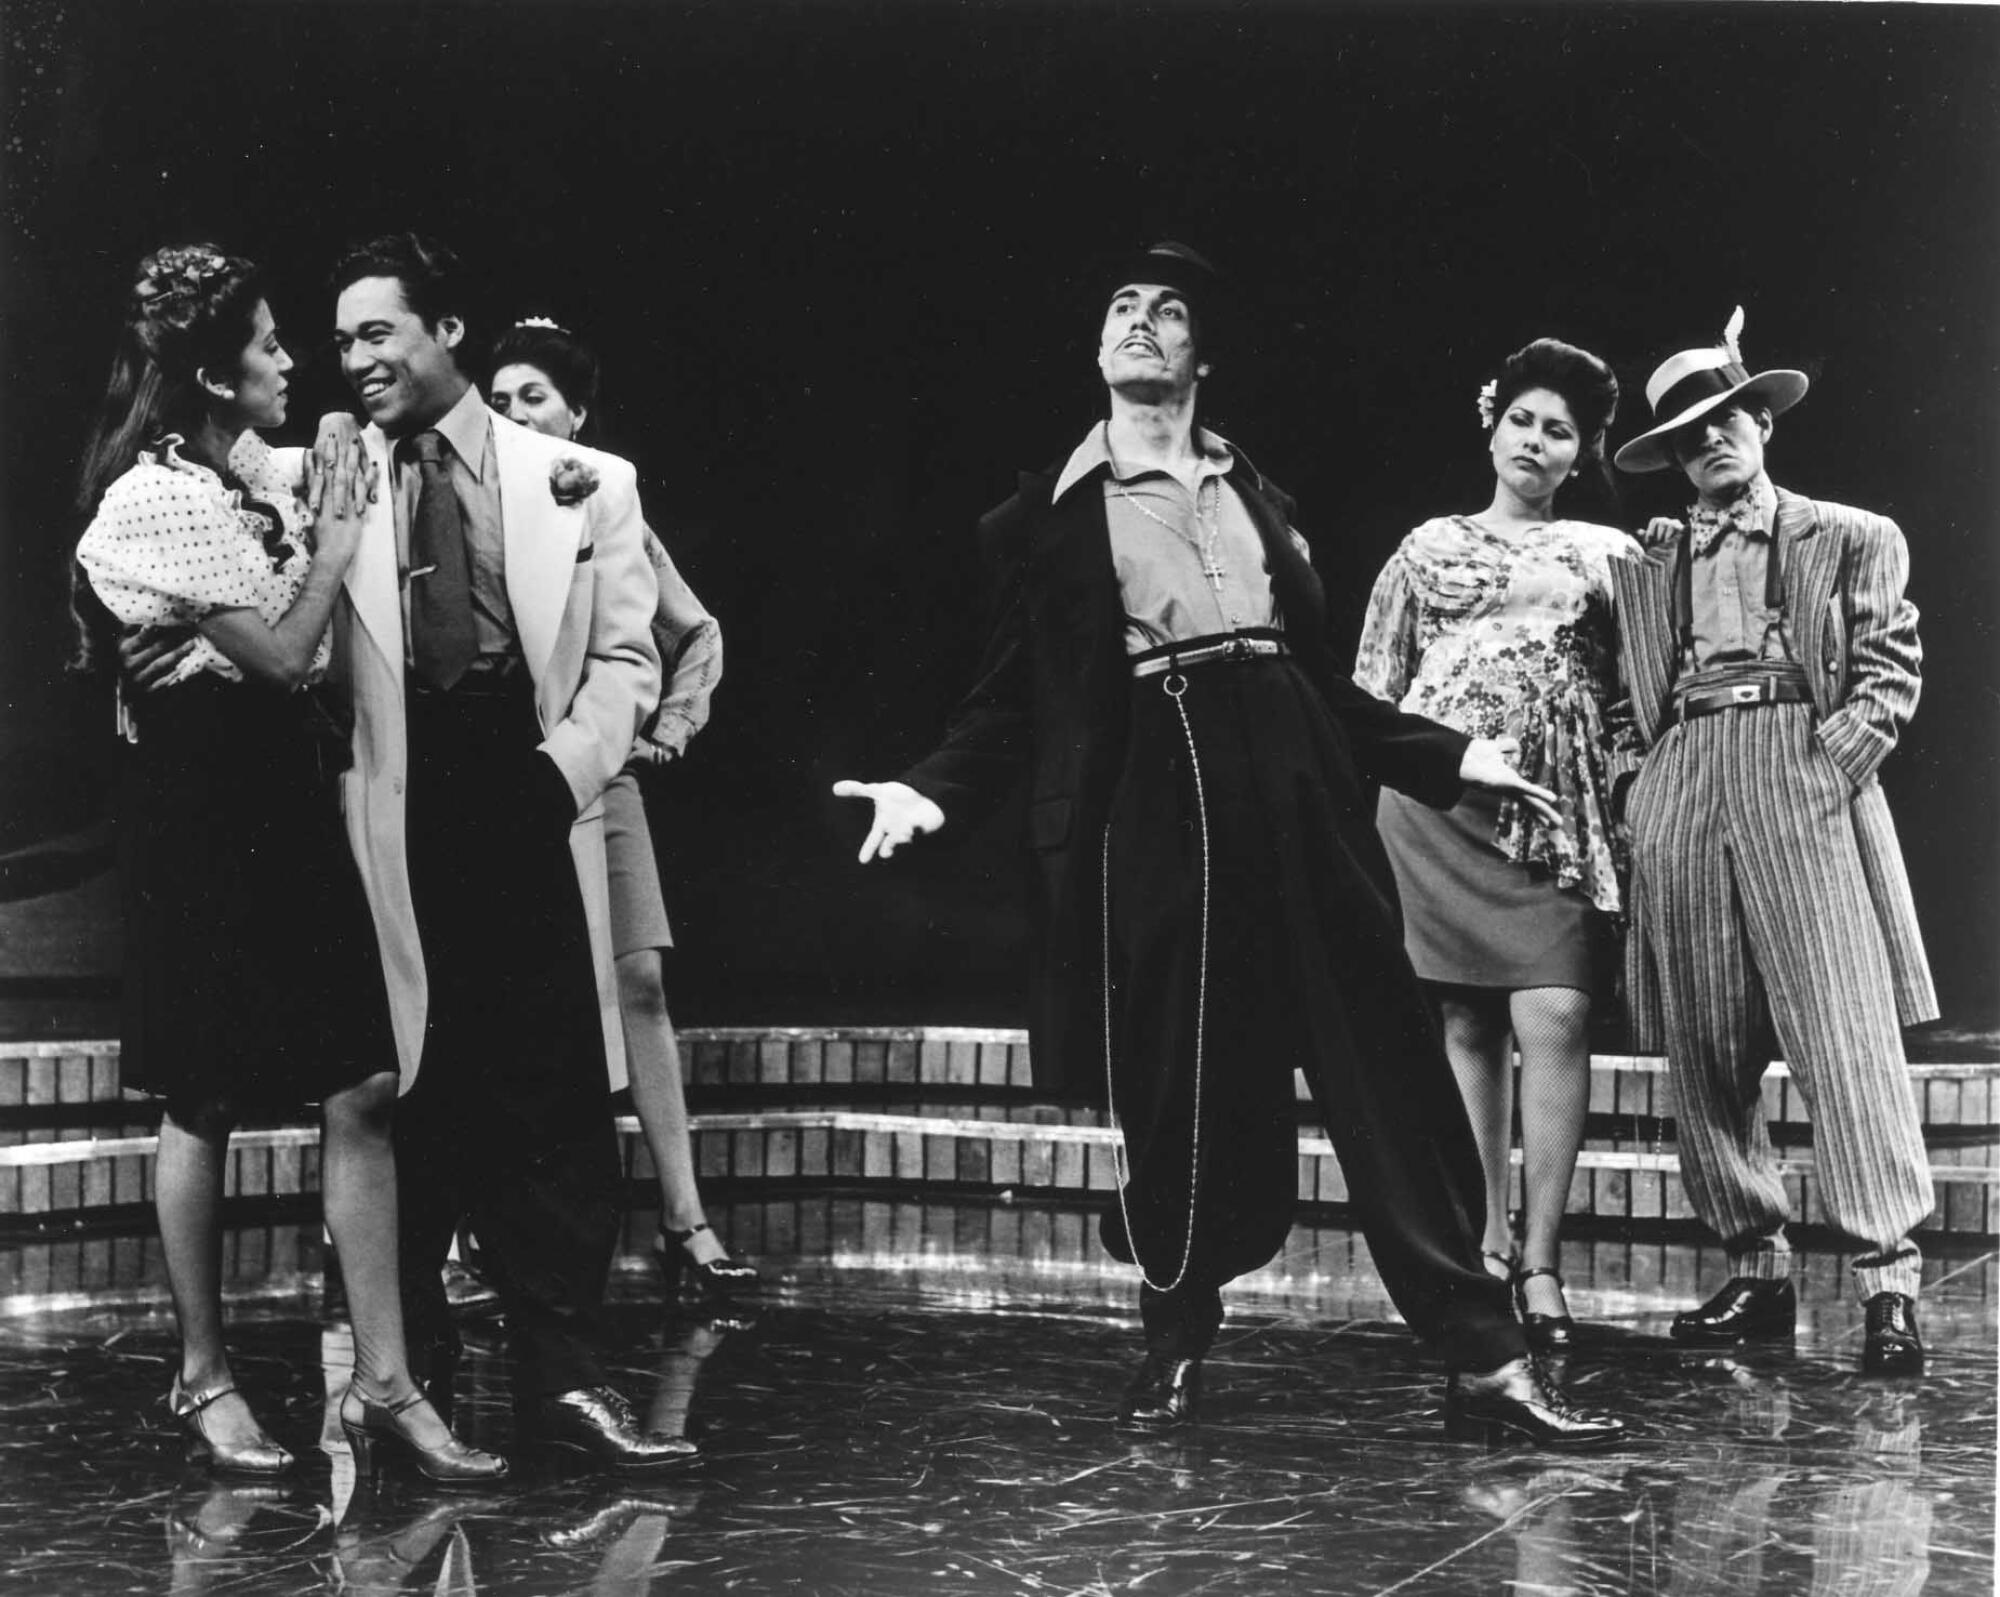 A historic photo shows a group of actors, including Edward James Olmos, dressed as pachucos in zoot suits on stage